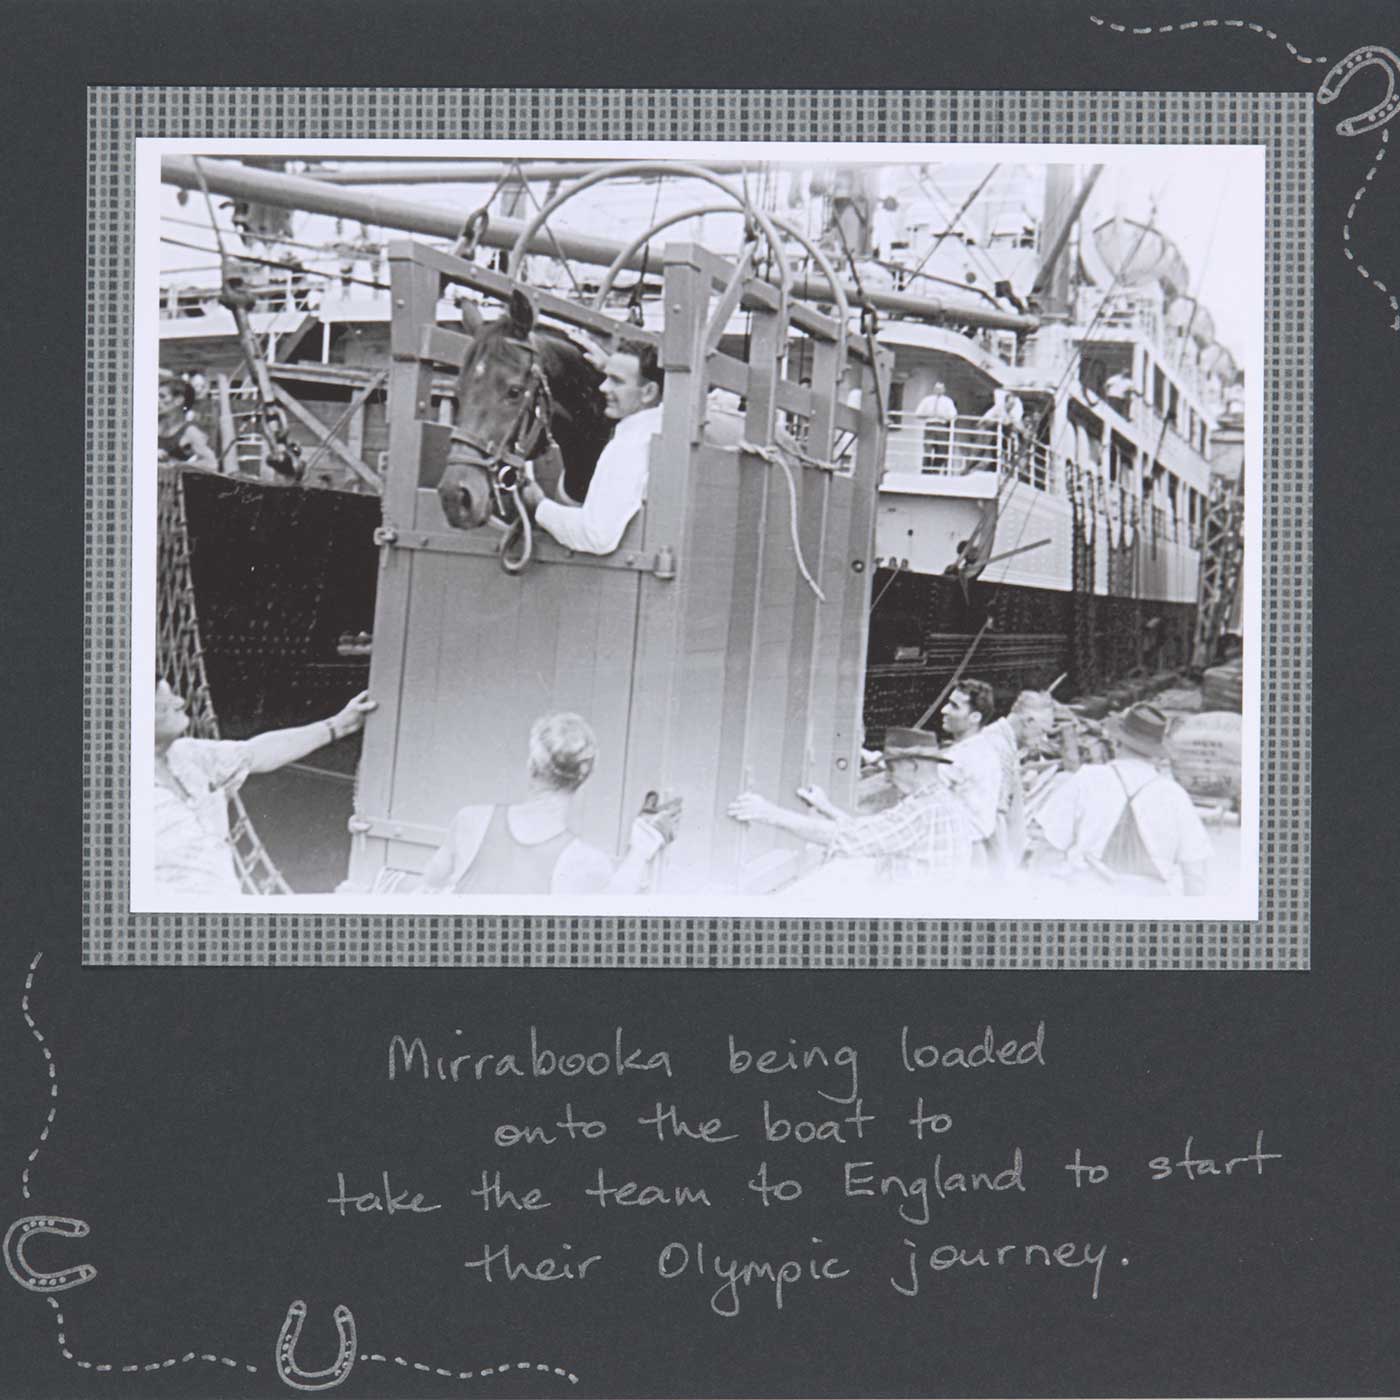 Neale helping load Mirrabooka onto the SS <em>Jason</em>, for the trip to England, 1959. - click to view larger image